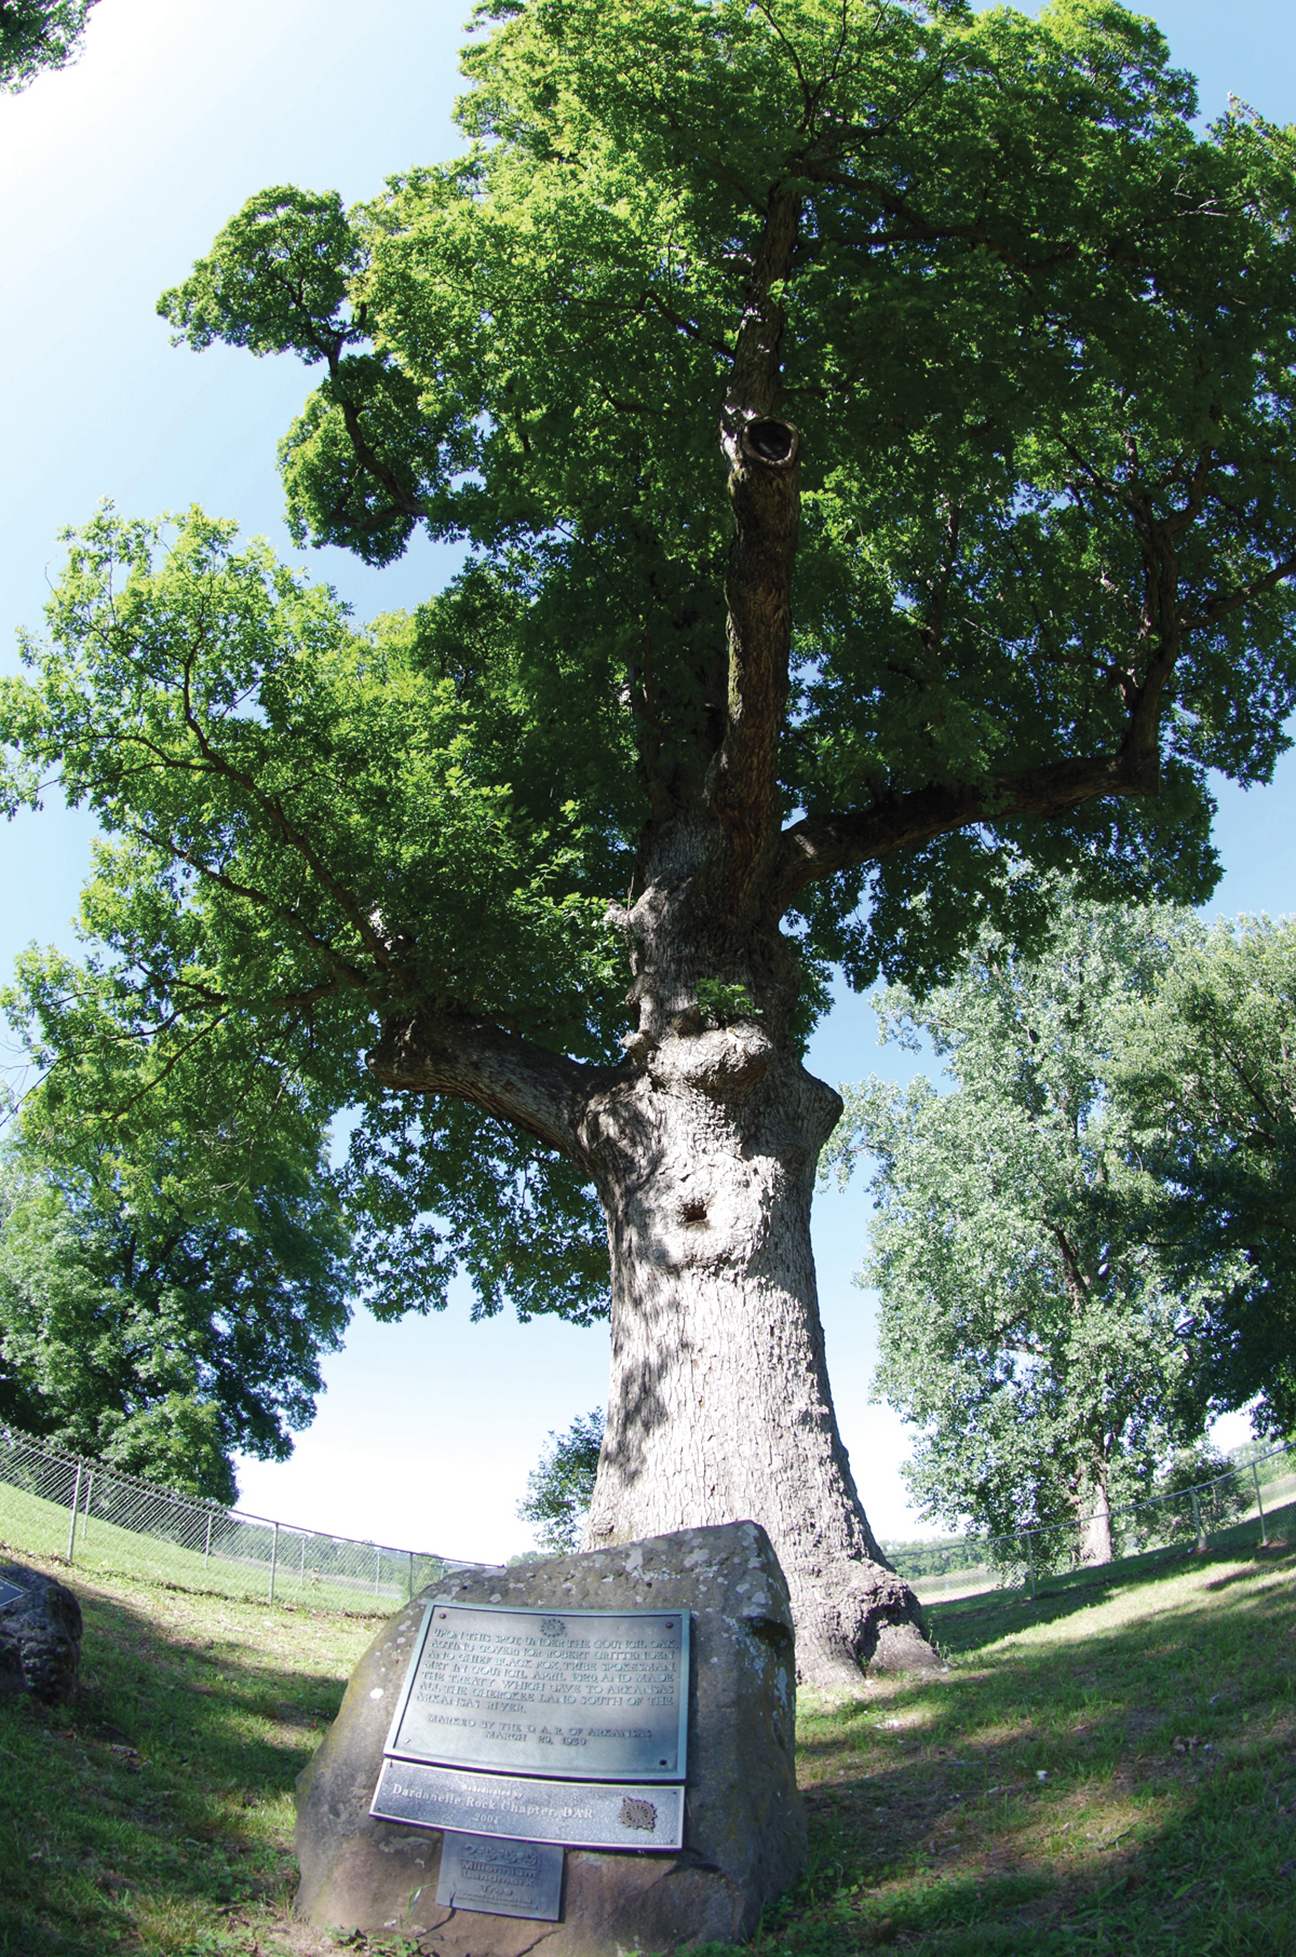 Programs Serve As Guides To The Most Historic Trees